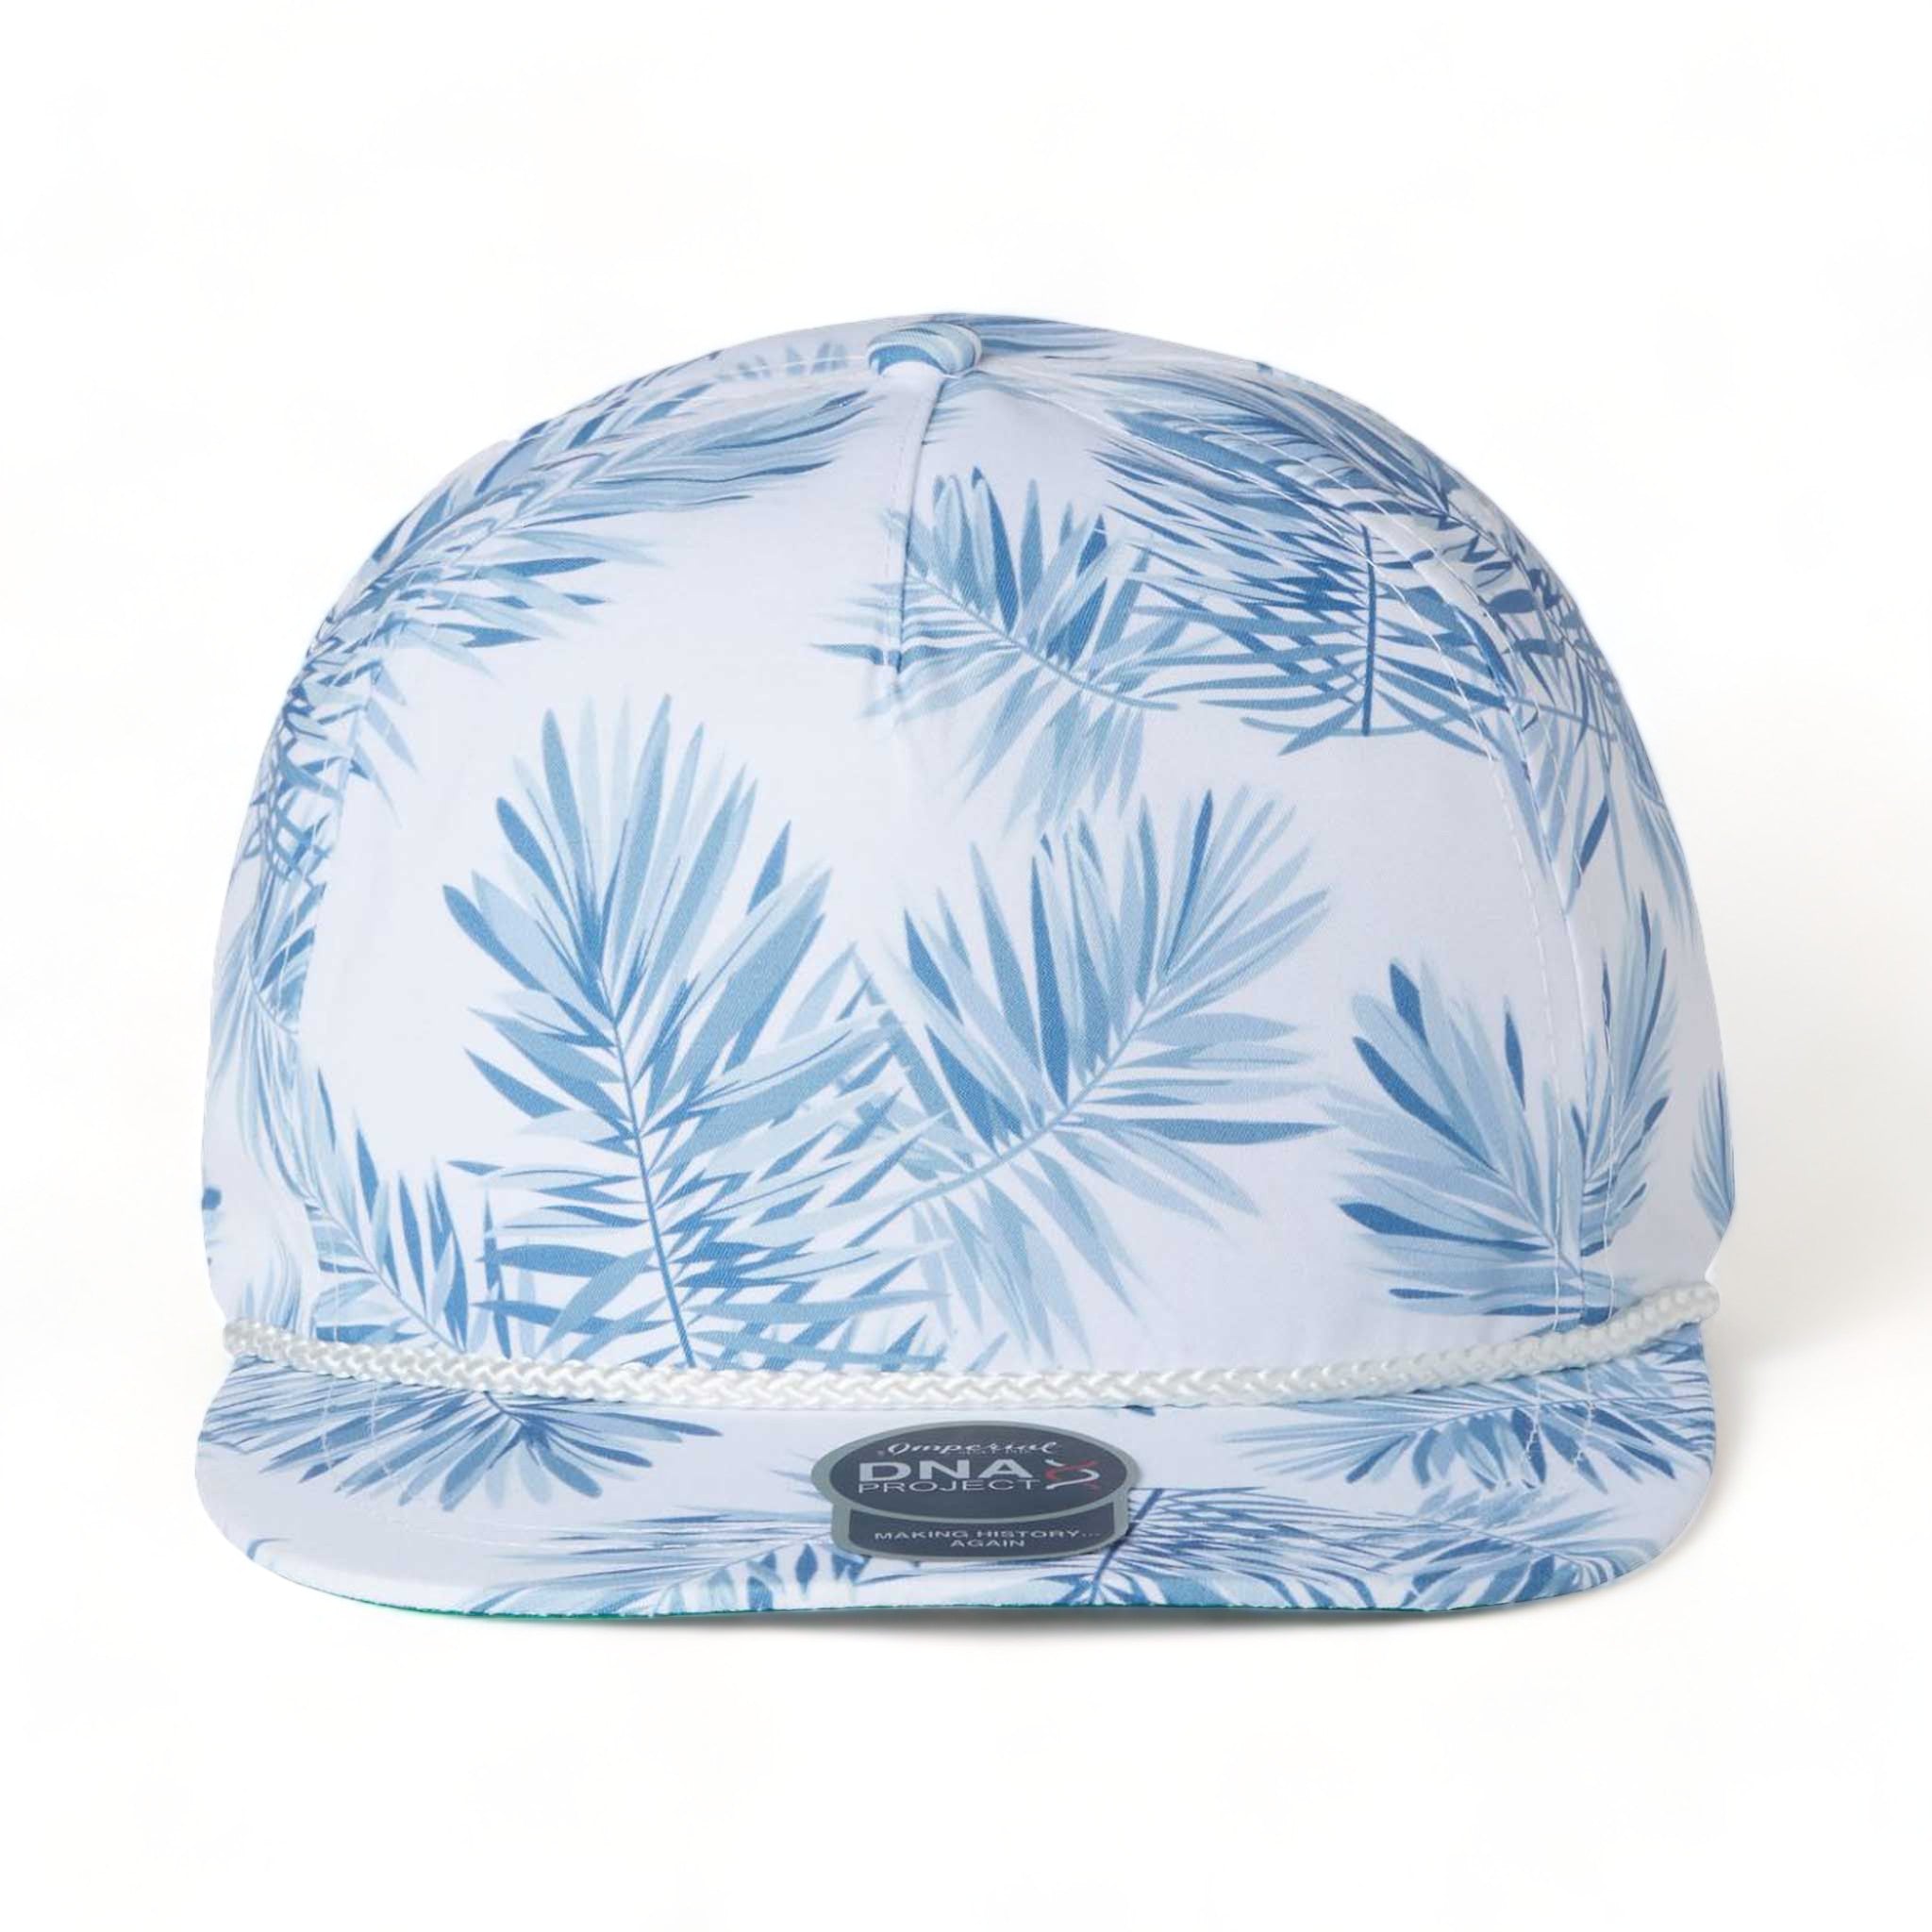 Front view of Imperial DNA010 custom hat in floral mist